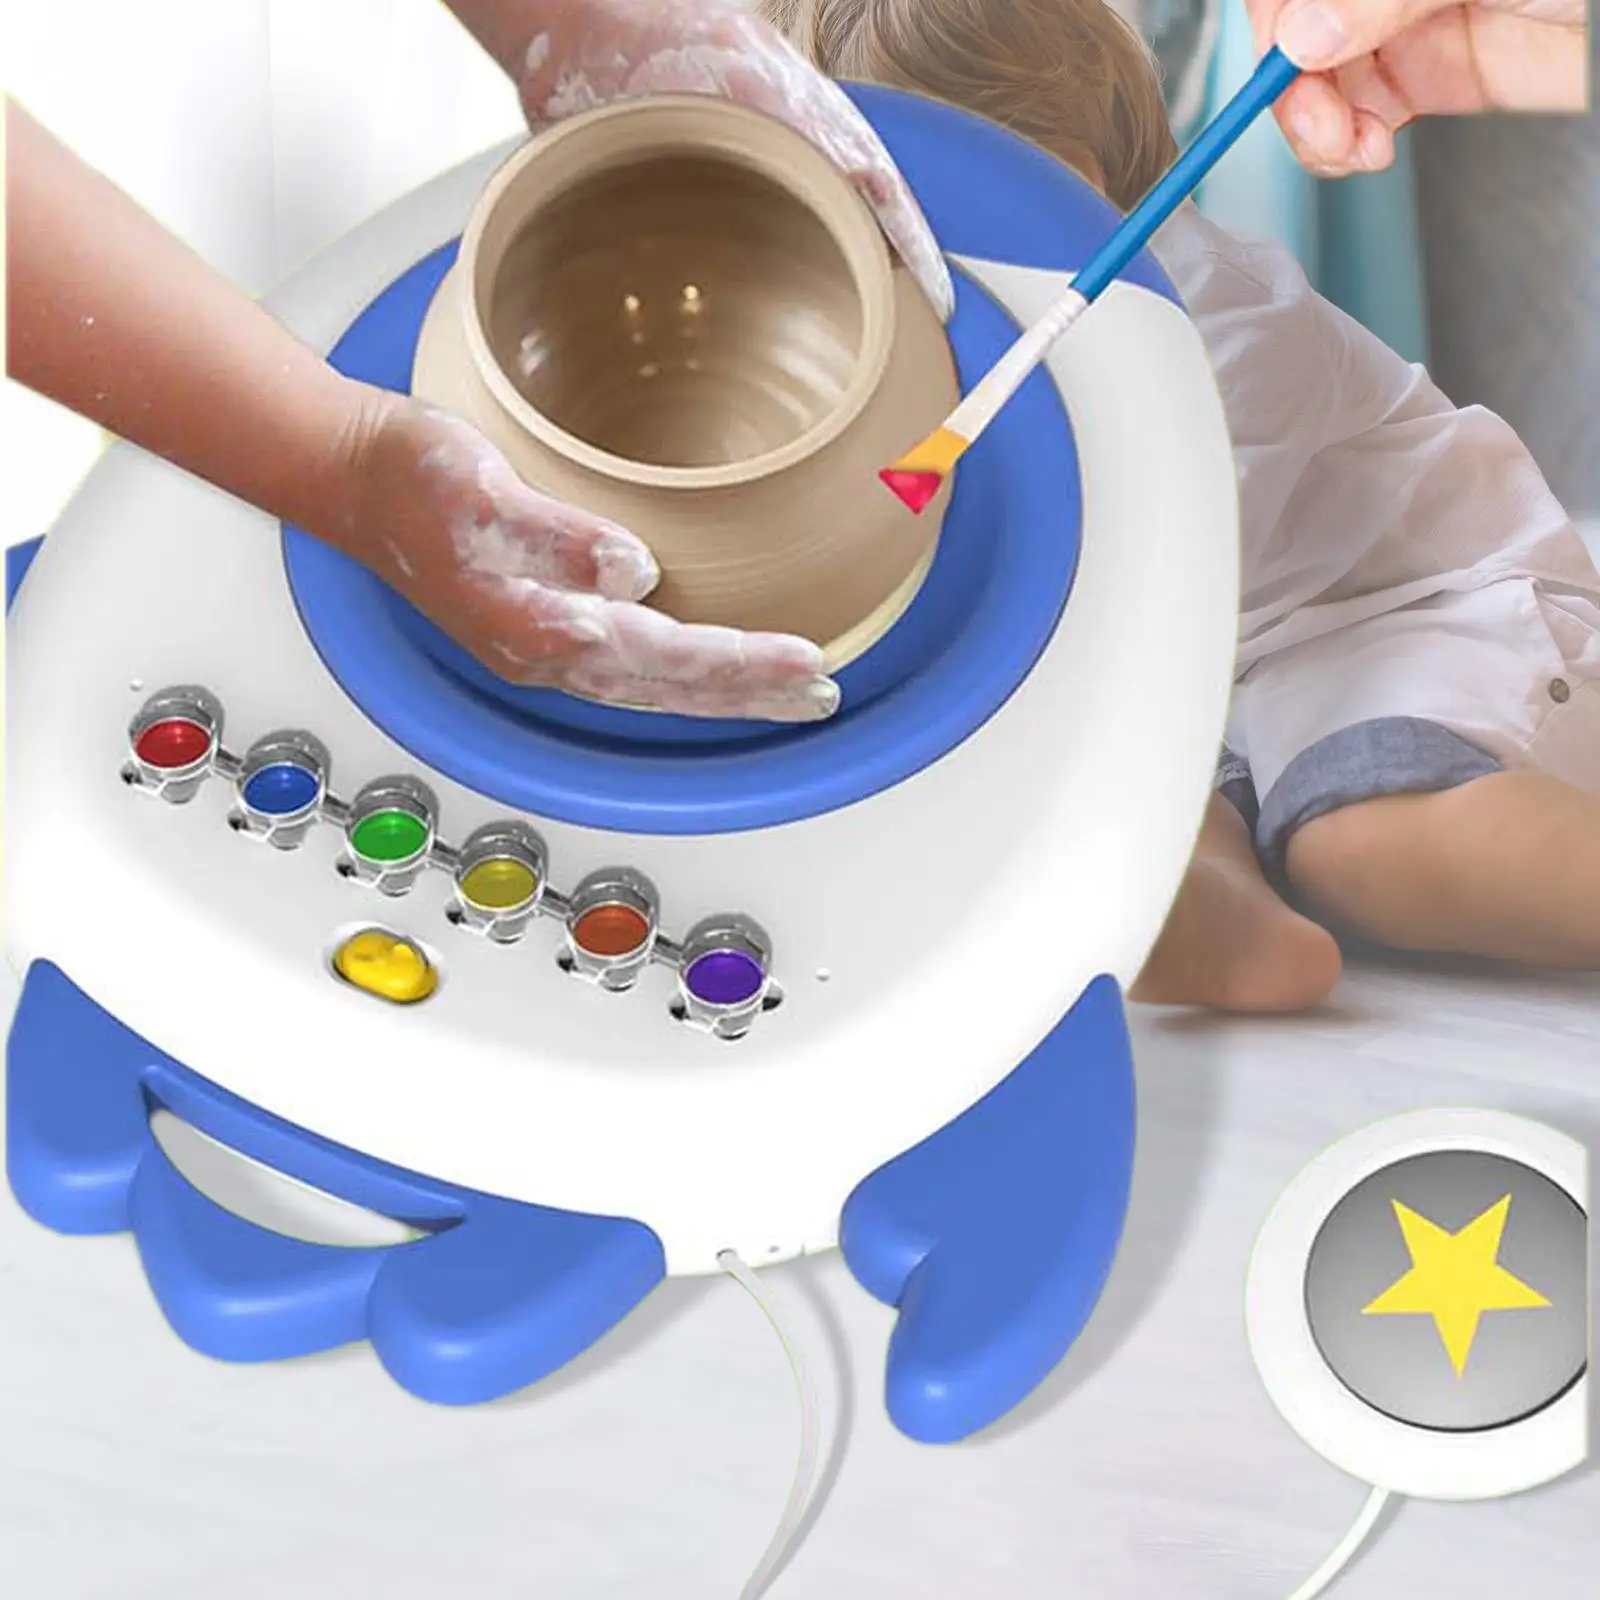 Handmade Pottery Machine Teaching Aids Cognition Interactive Toys for Learning Activities Preschool Kindergarten Holiday Daycare